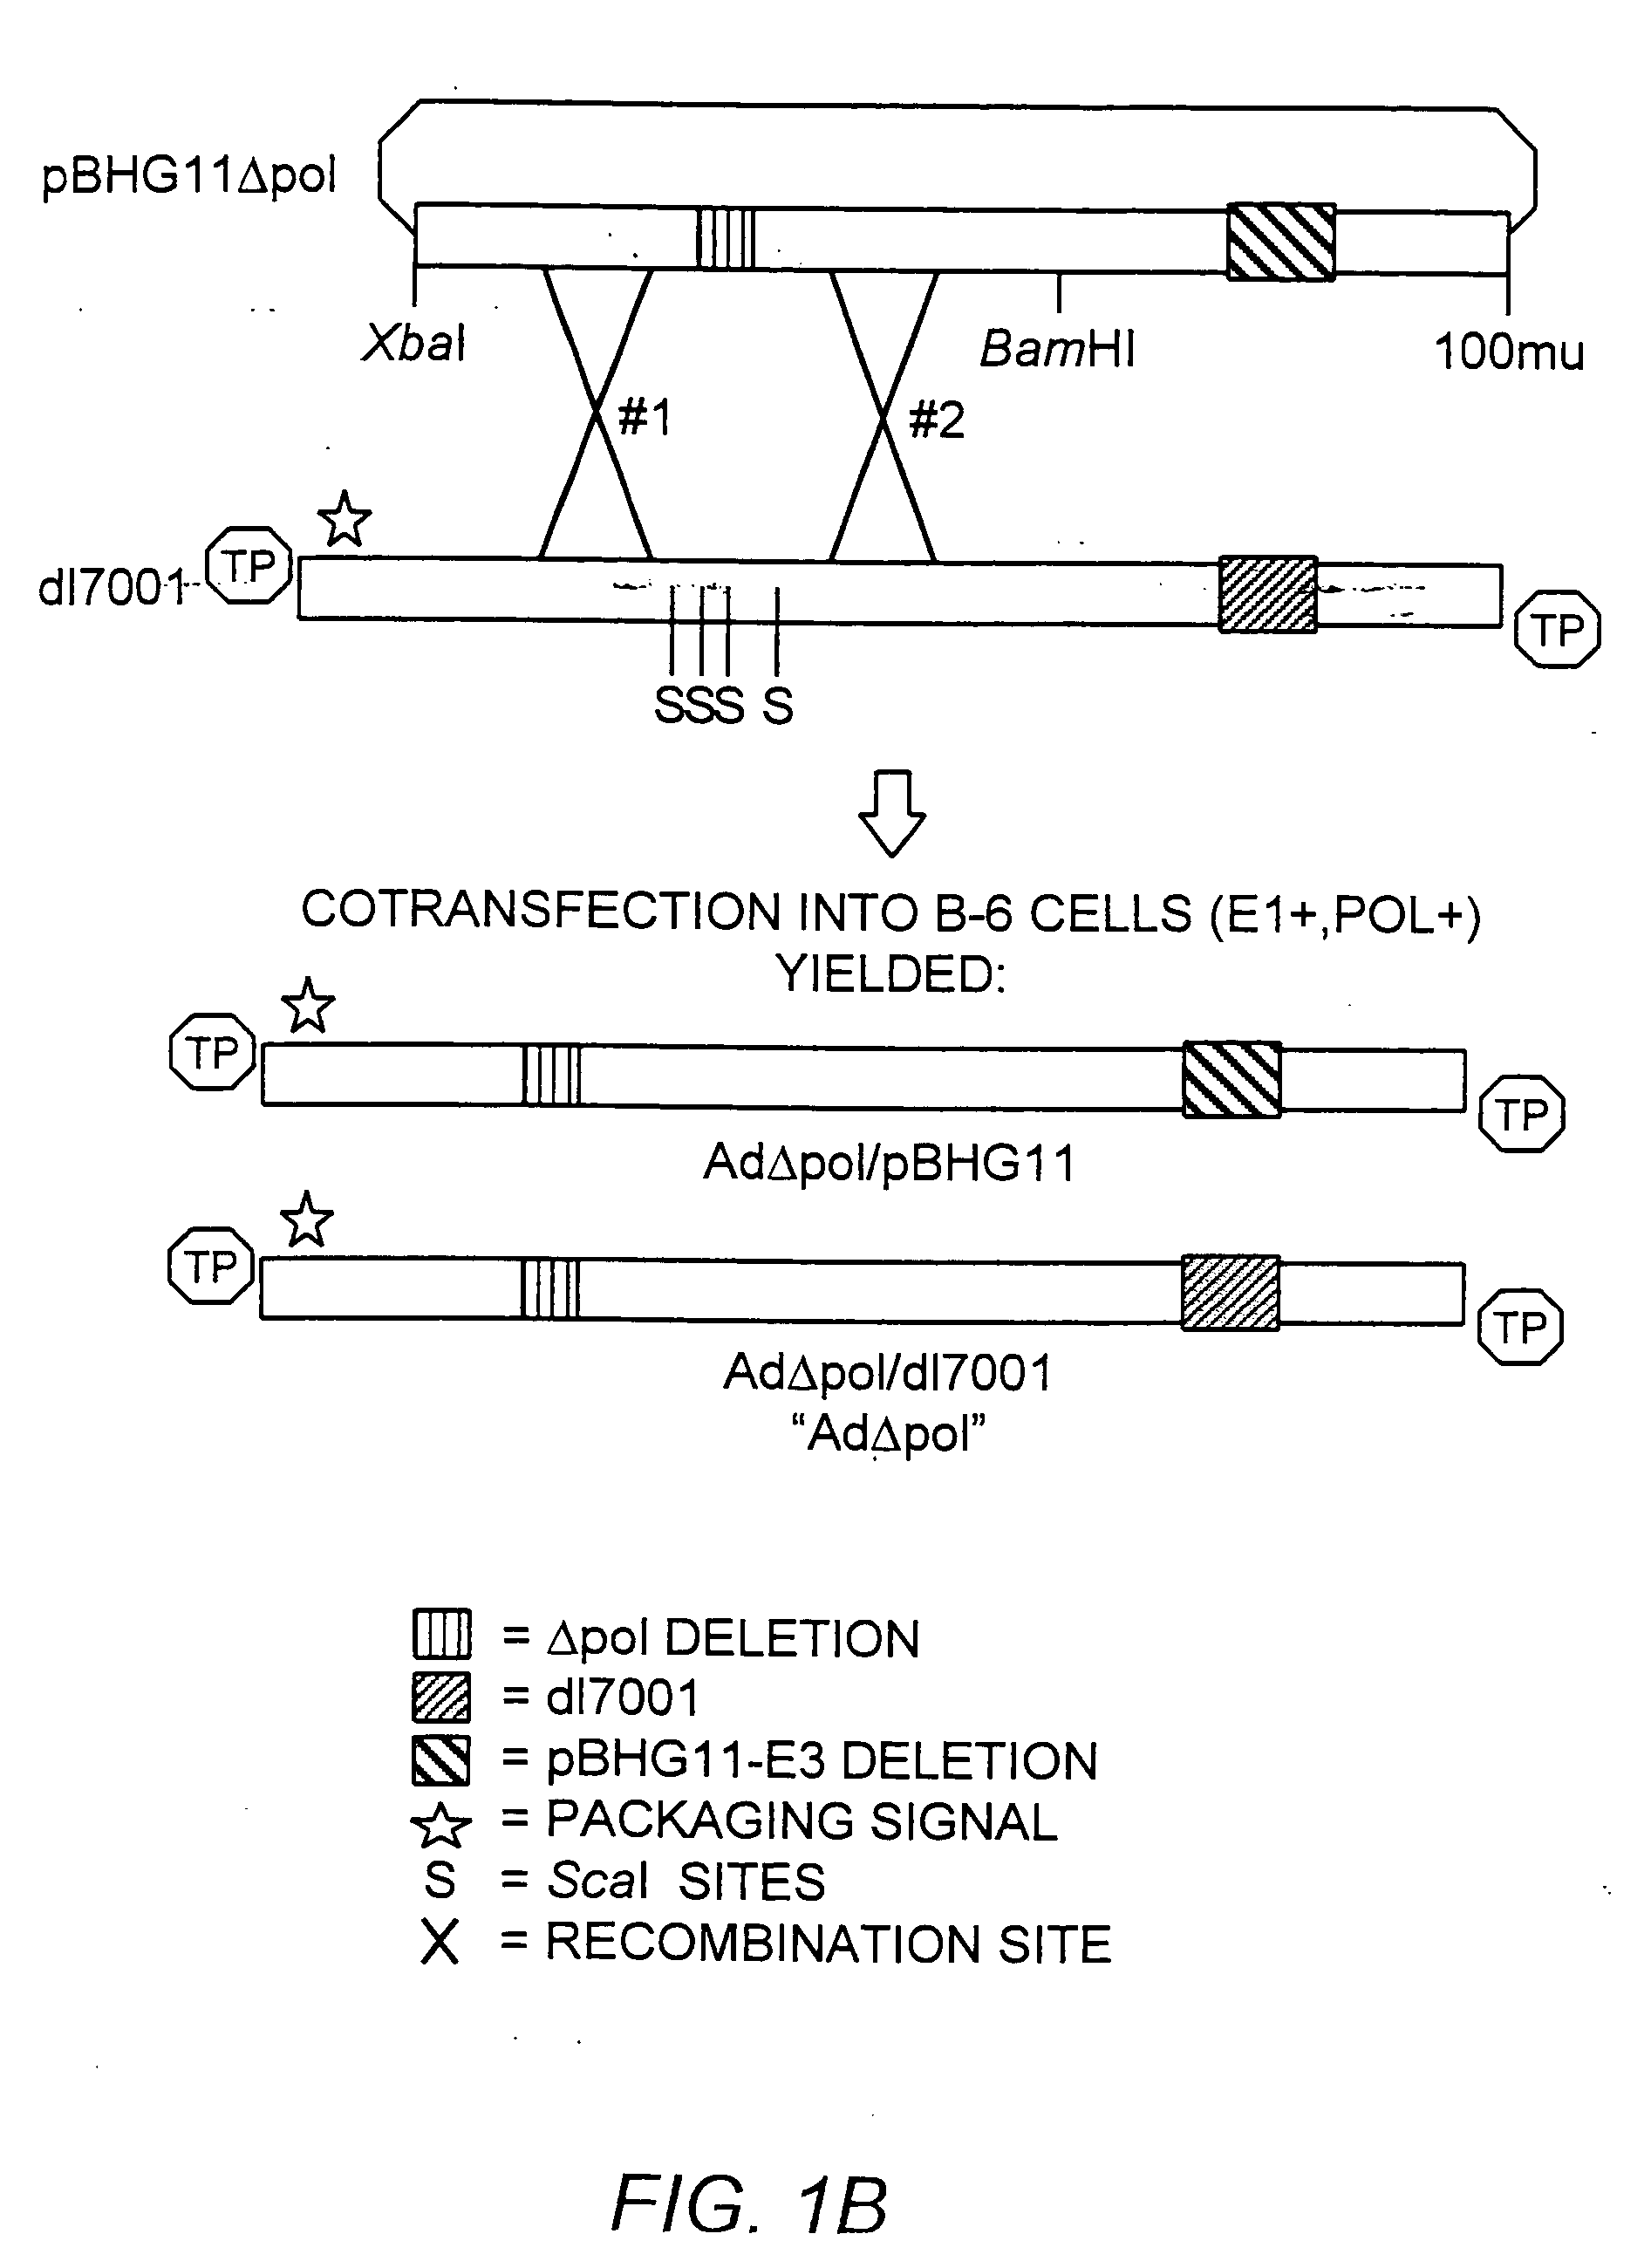 Deleted adenovirus vectors and methods of making and administering the same